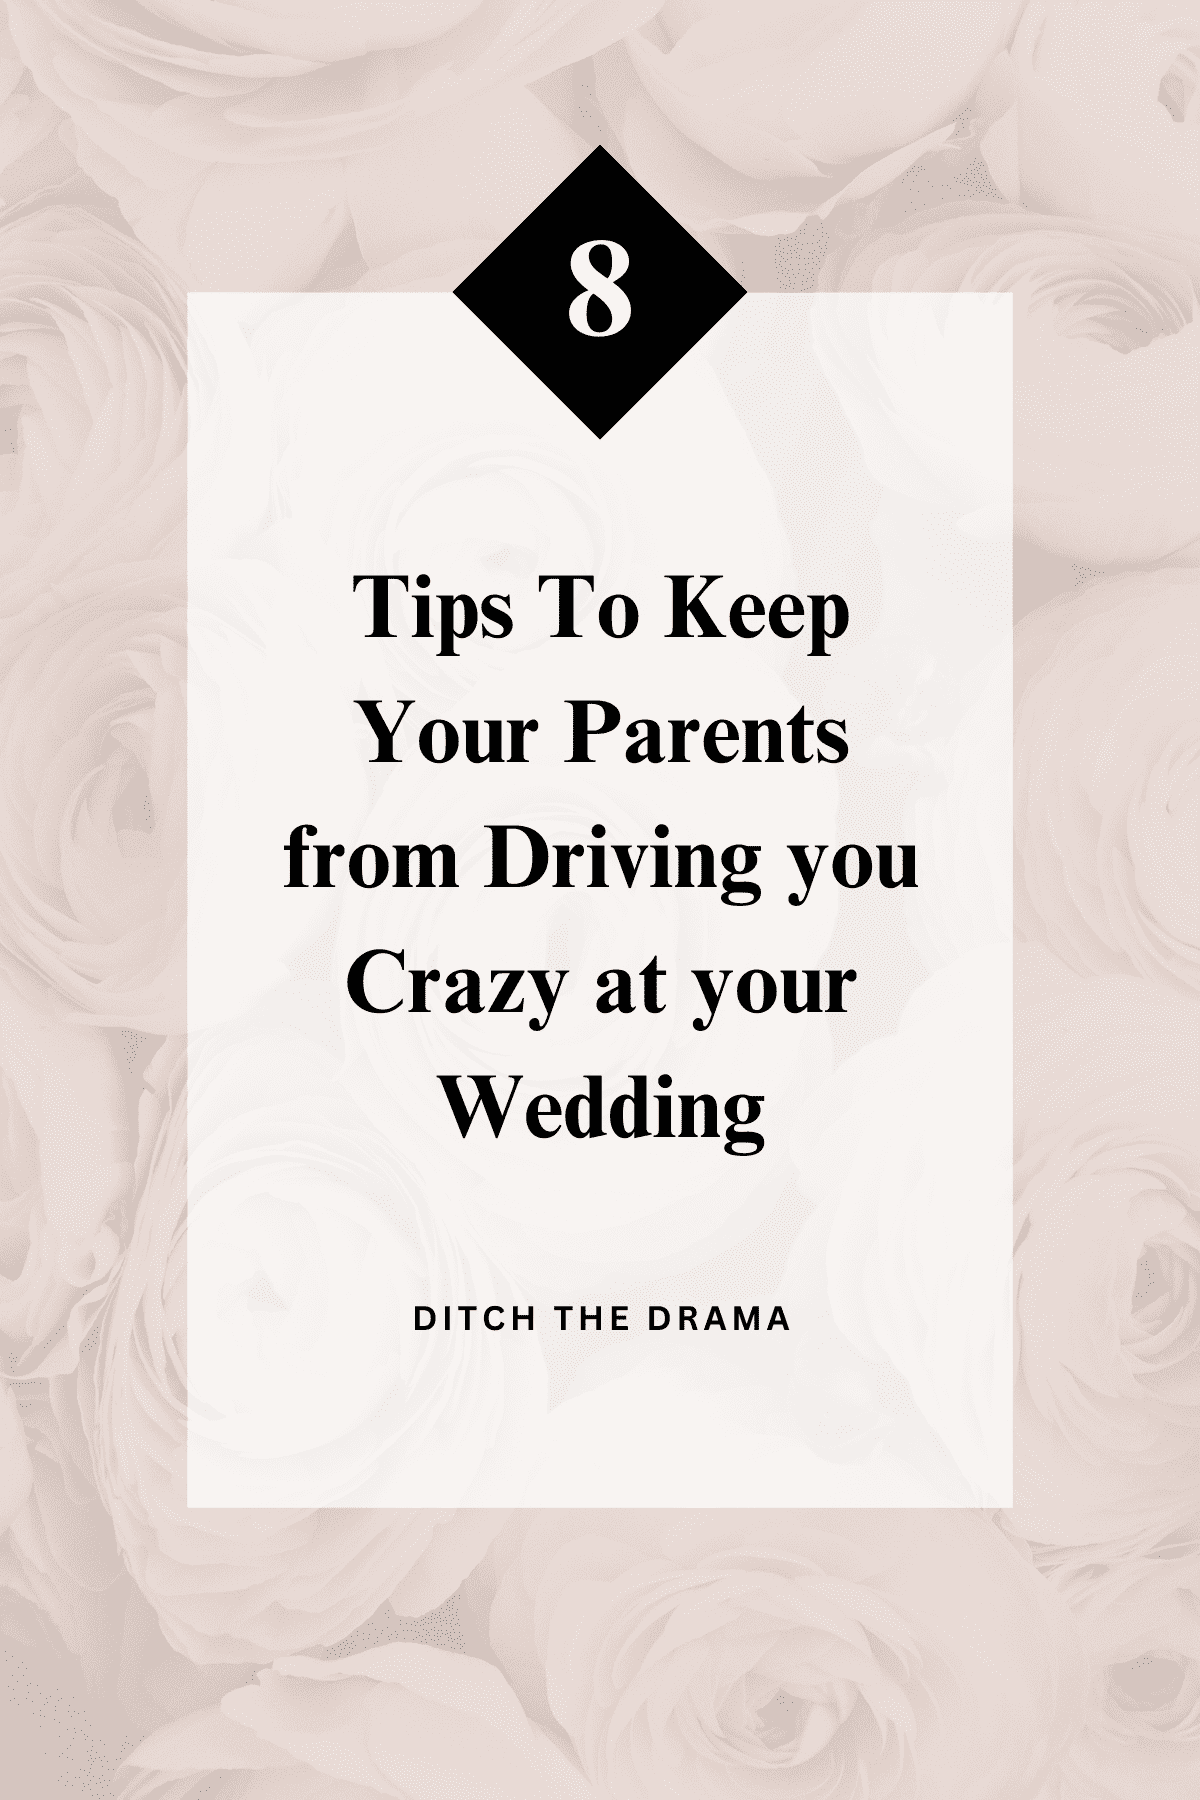 8 Tips To Keep Your Parents from Driving you Crazy at your Wedding